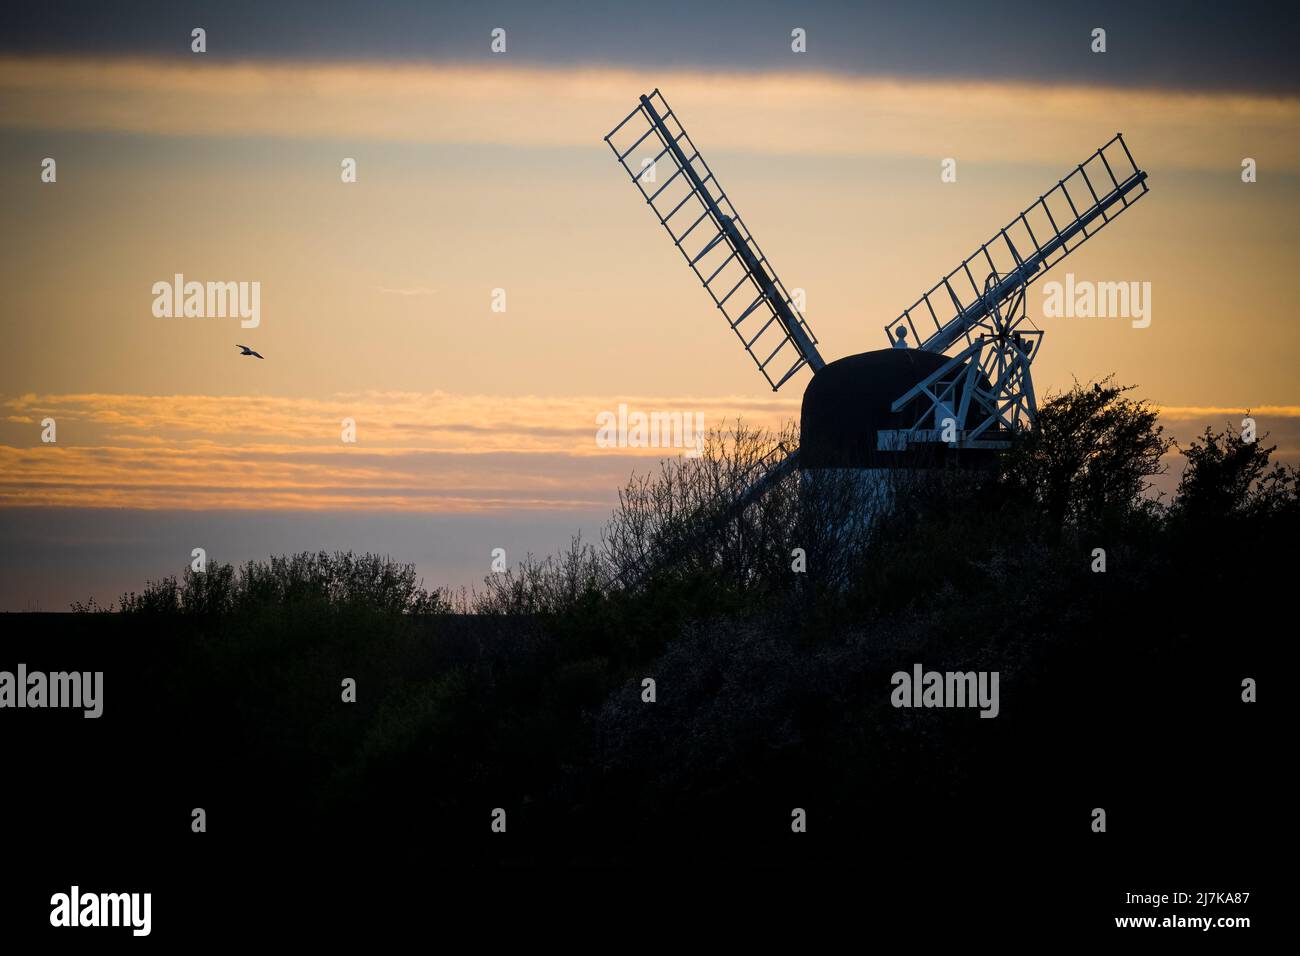 Silhouette of windmill captured at sunset in rural setting Stock Photo